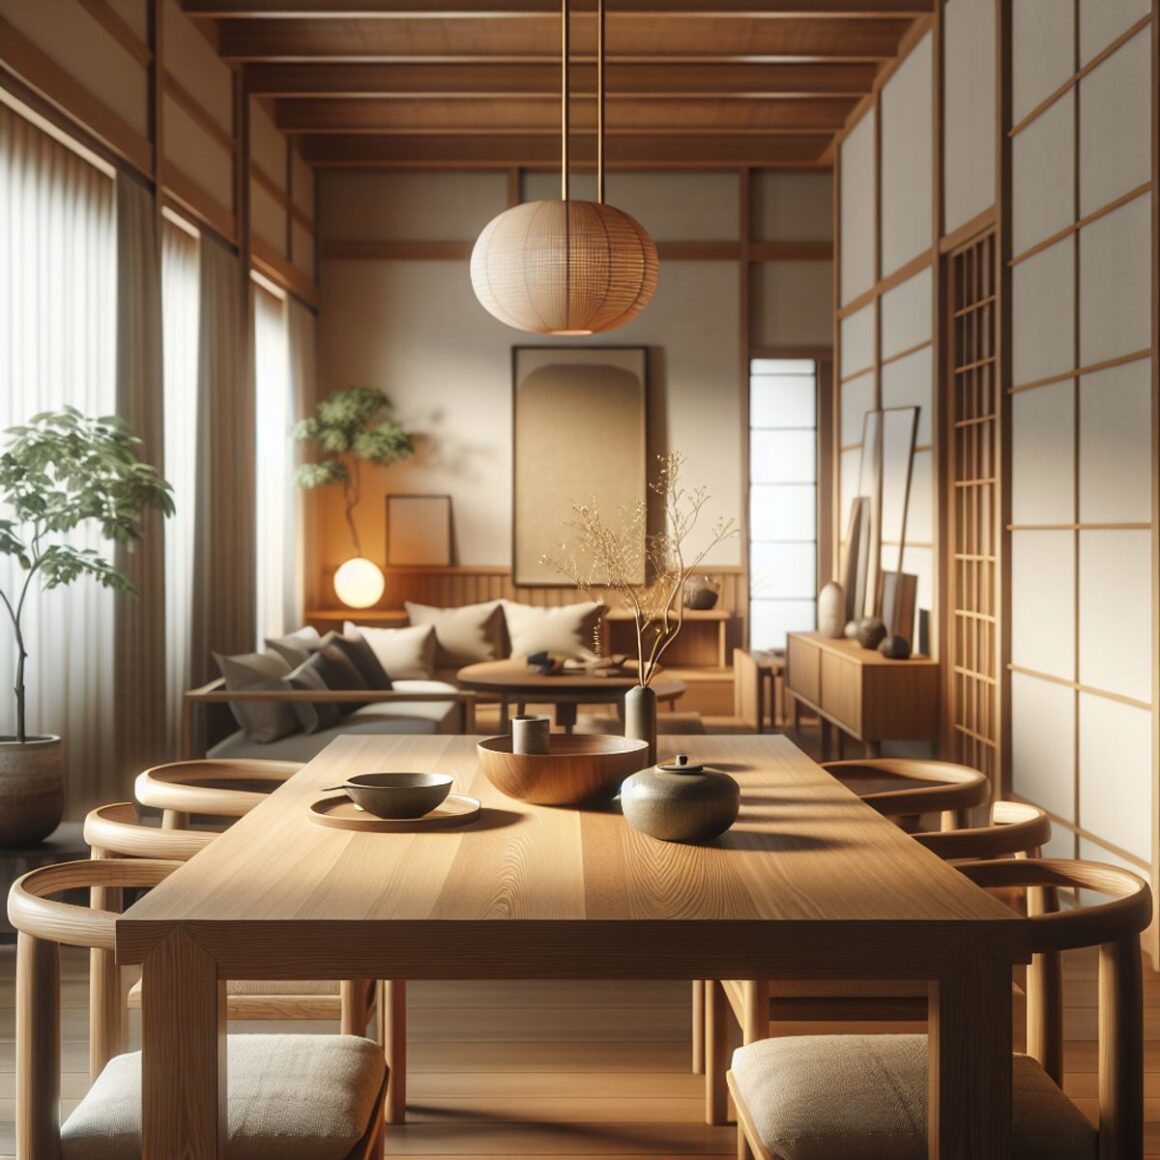 Japandi-style dining room with warm lighting and a simple wooden table